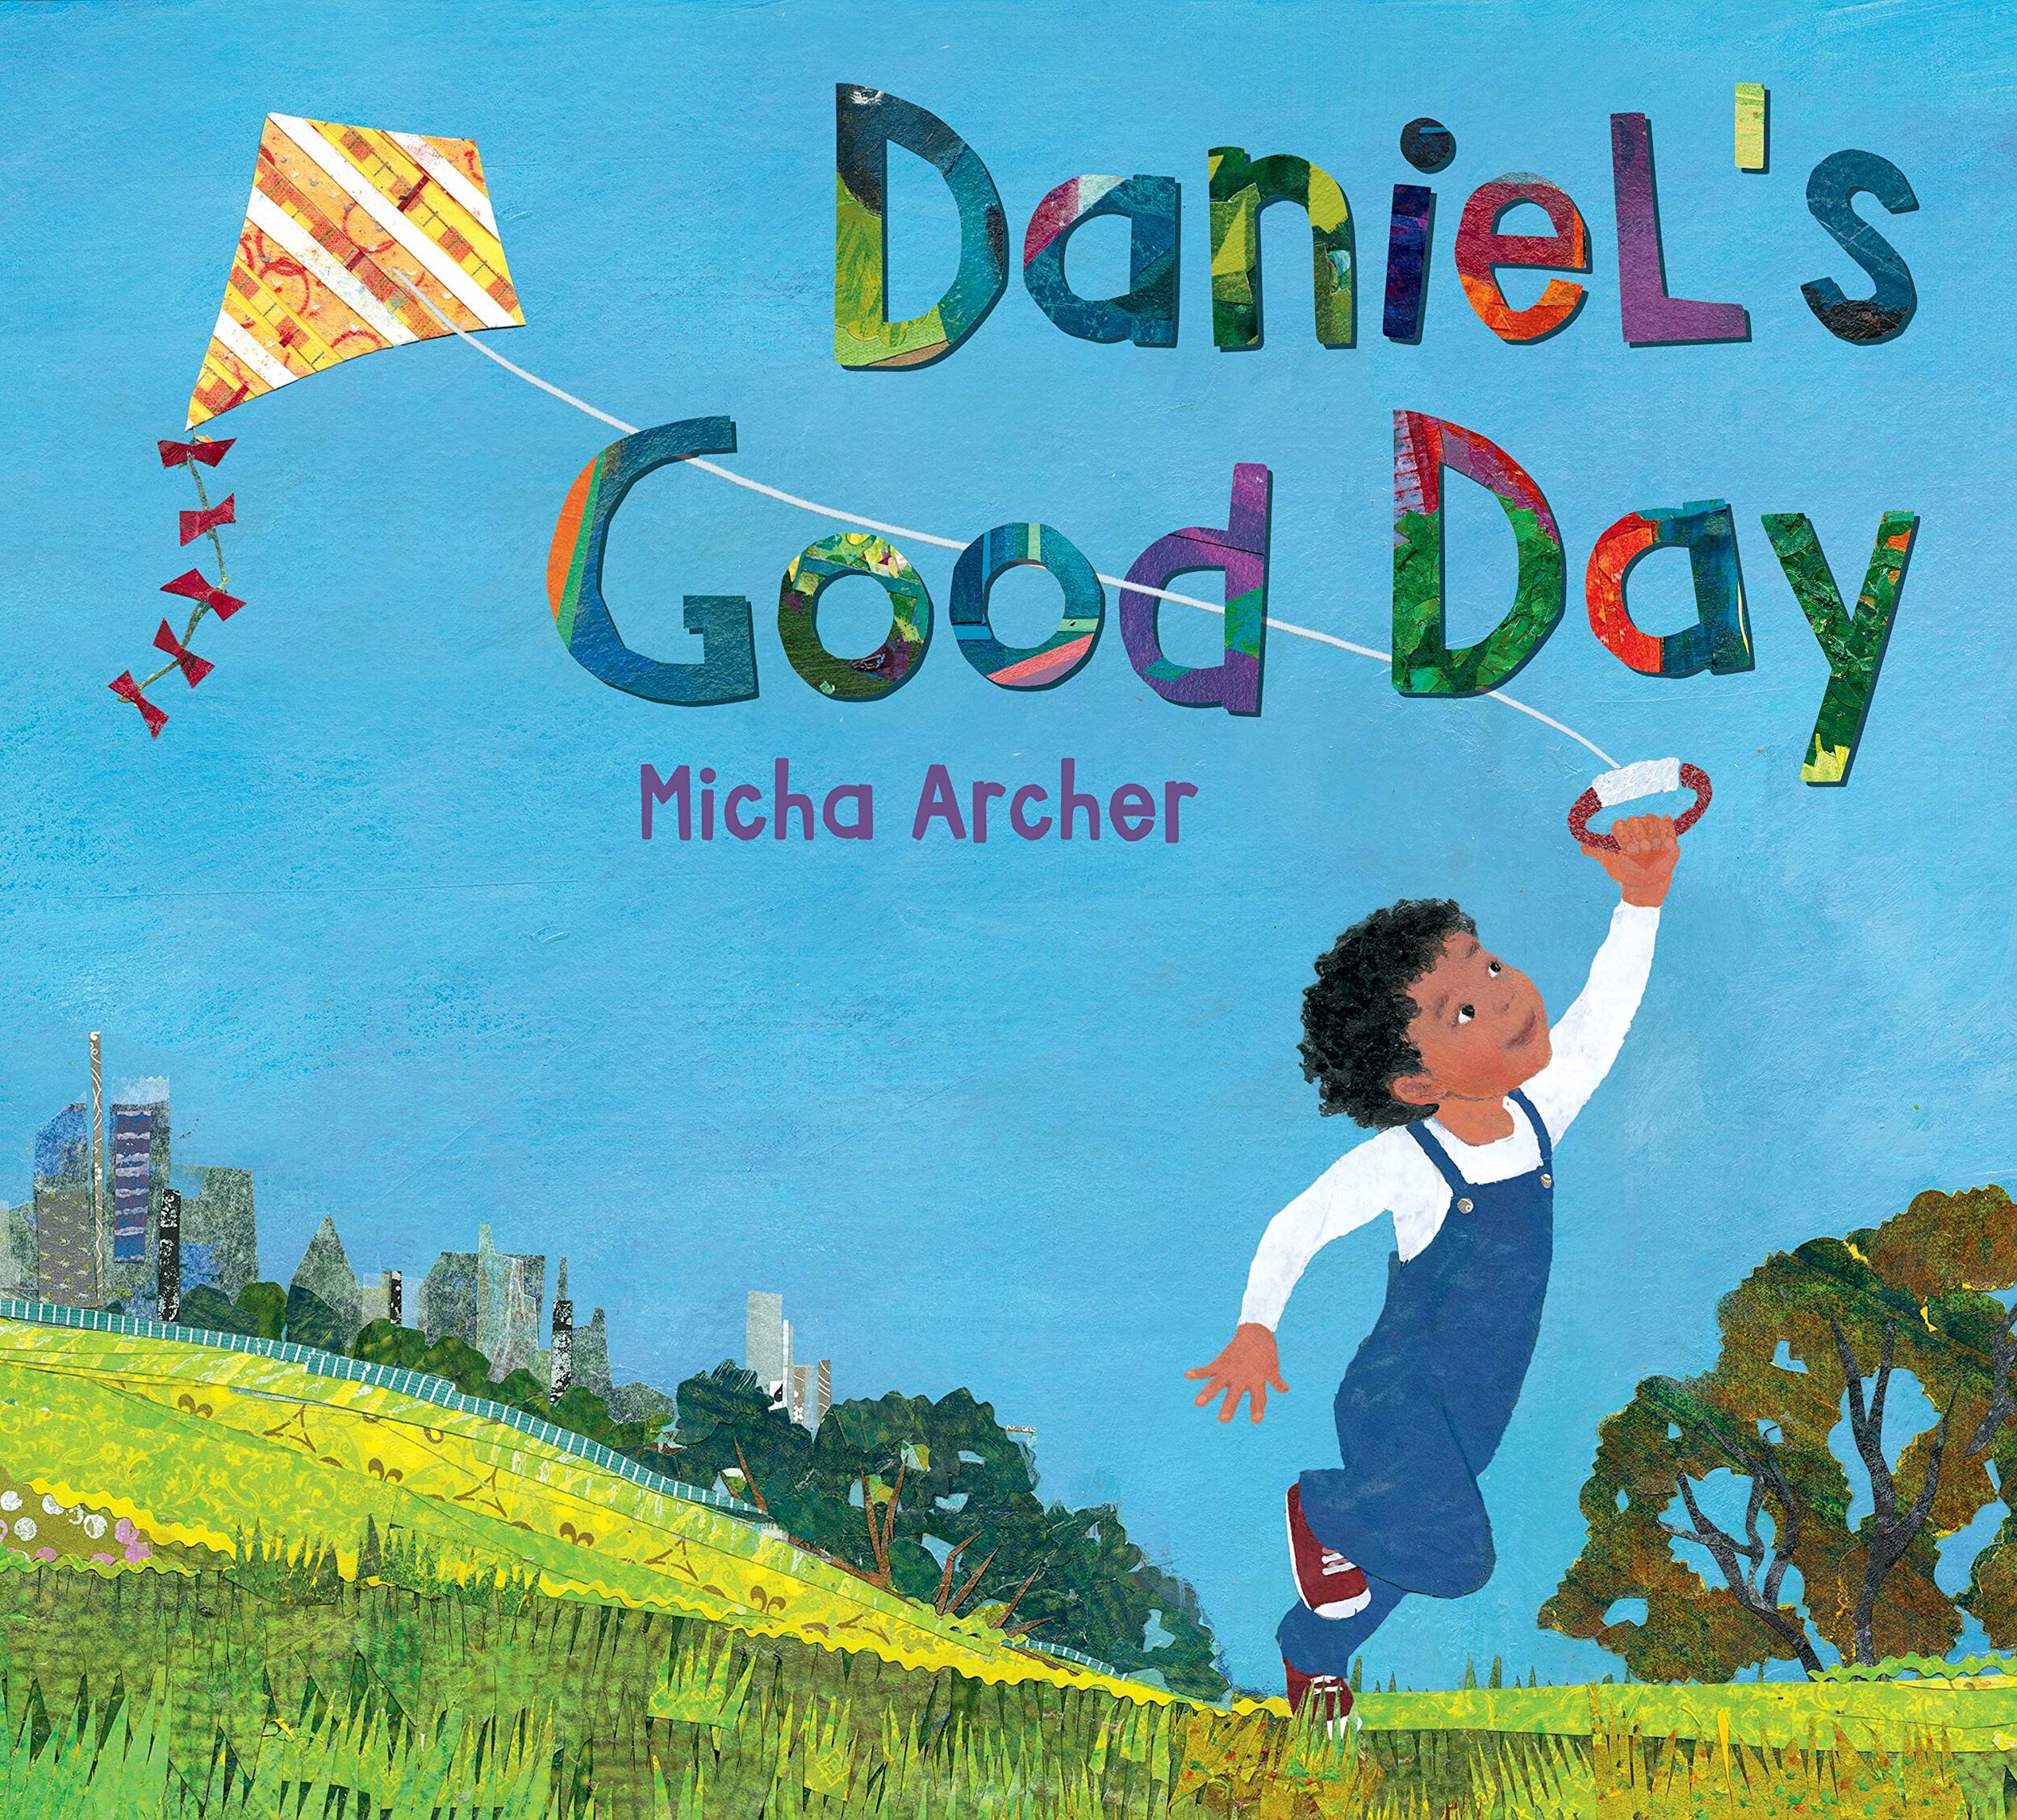 Daniel’s Good Day – Micha Archer  (connecting to community) 